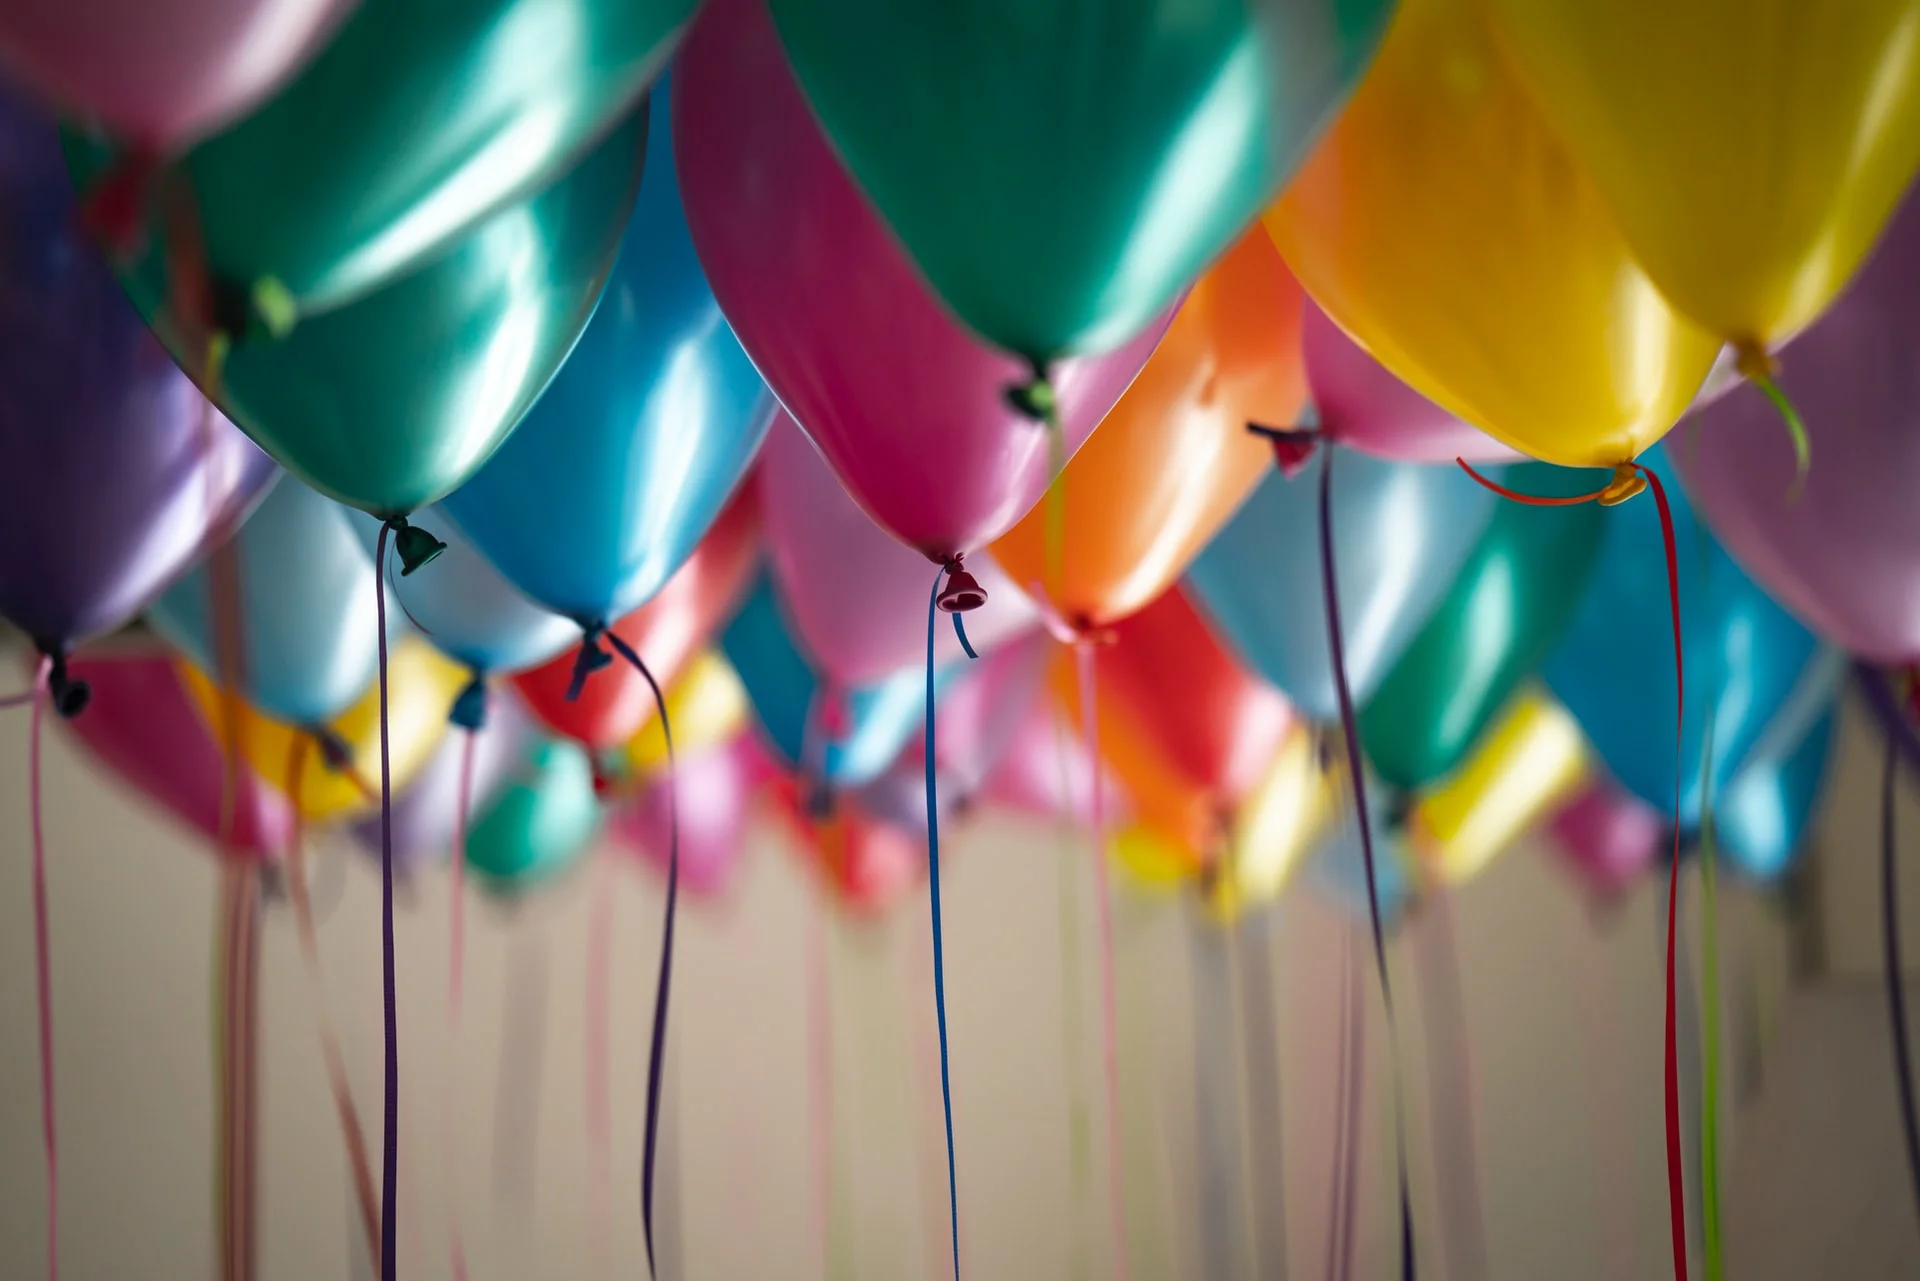 a group of colorful balloons